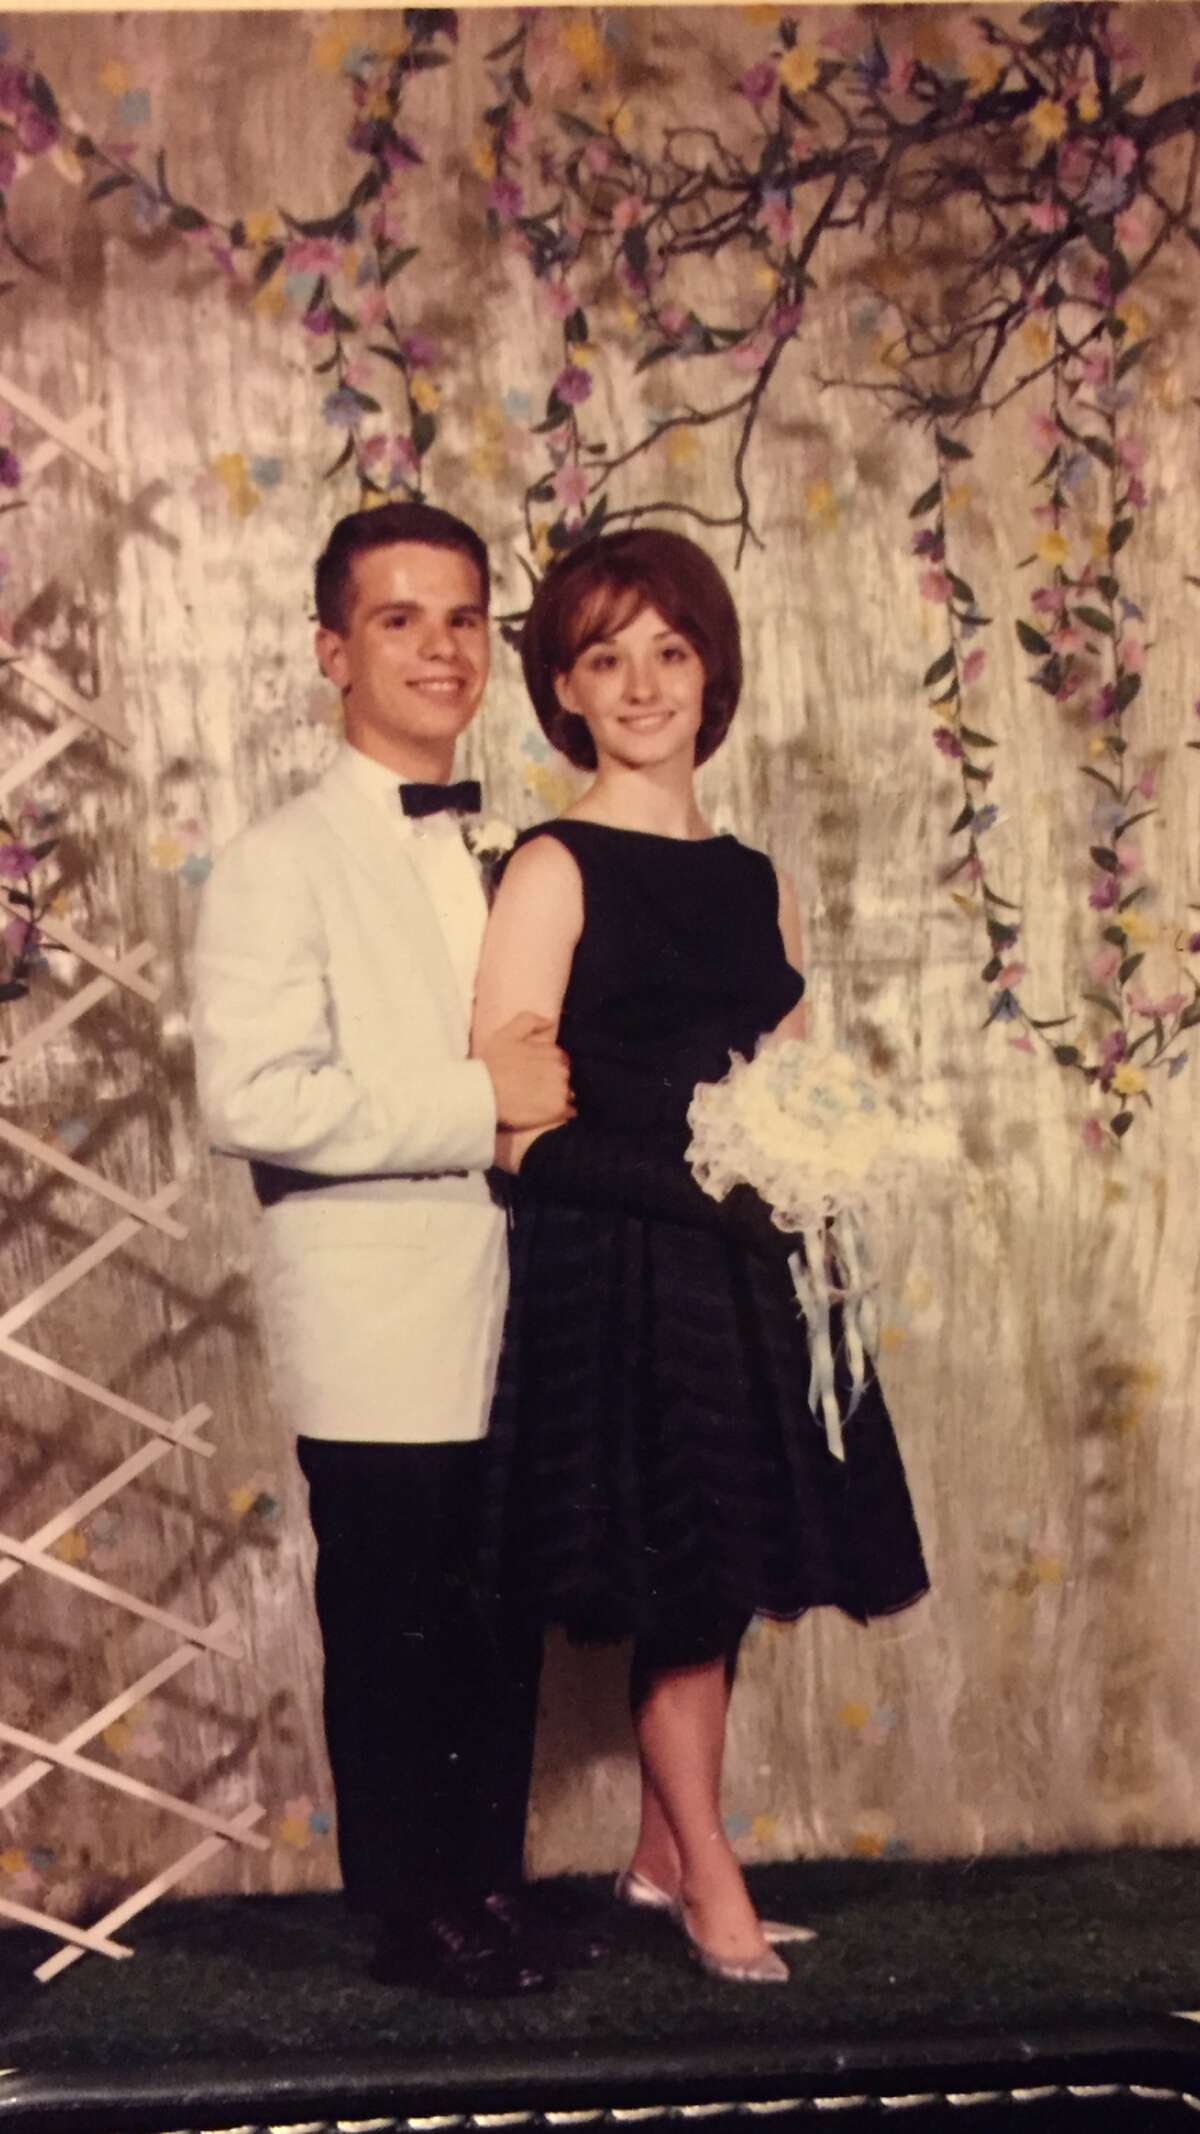 Readers shared images of their prom -- old as well as recent.